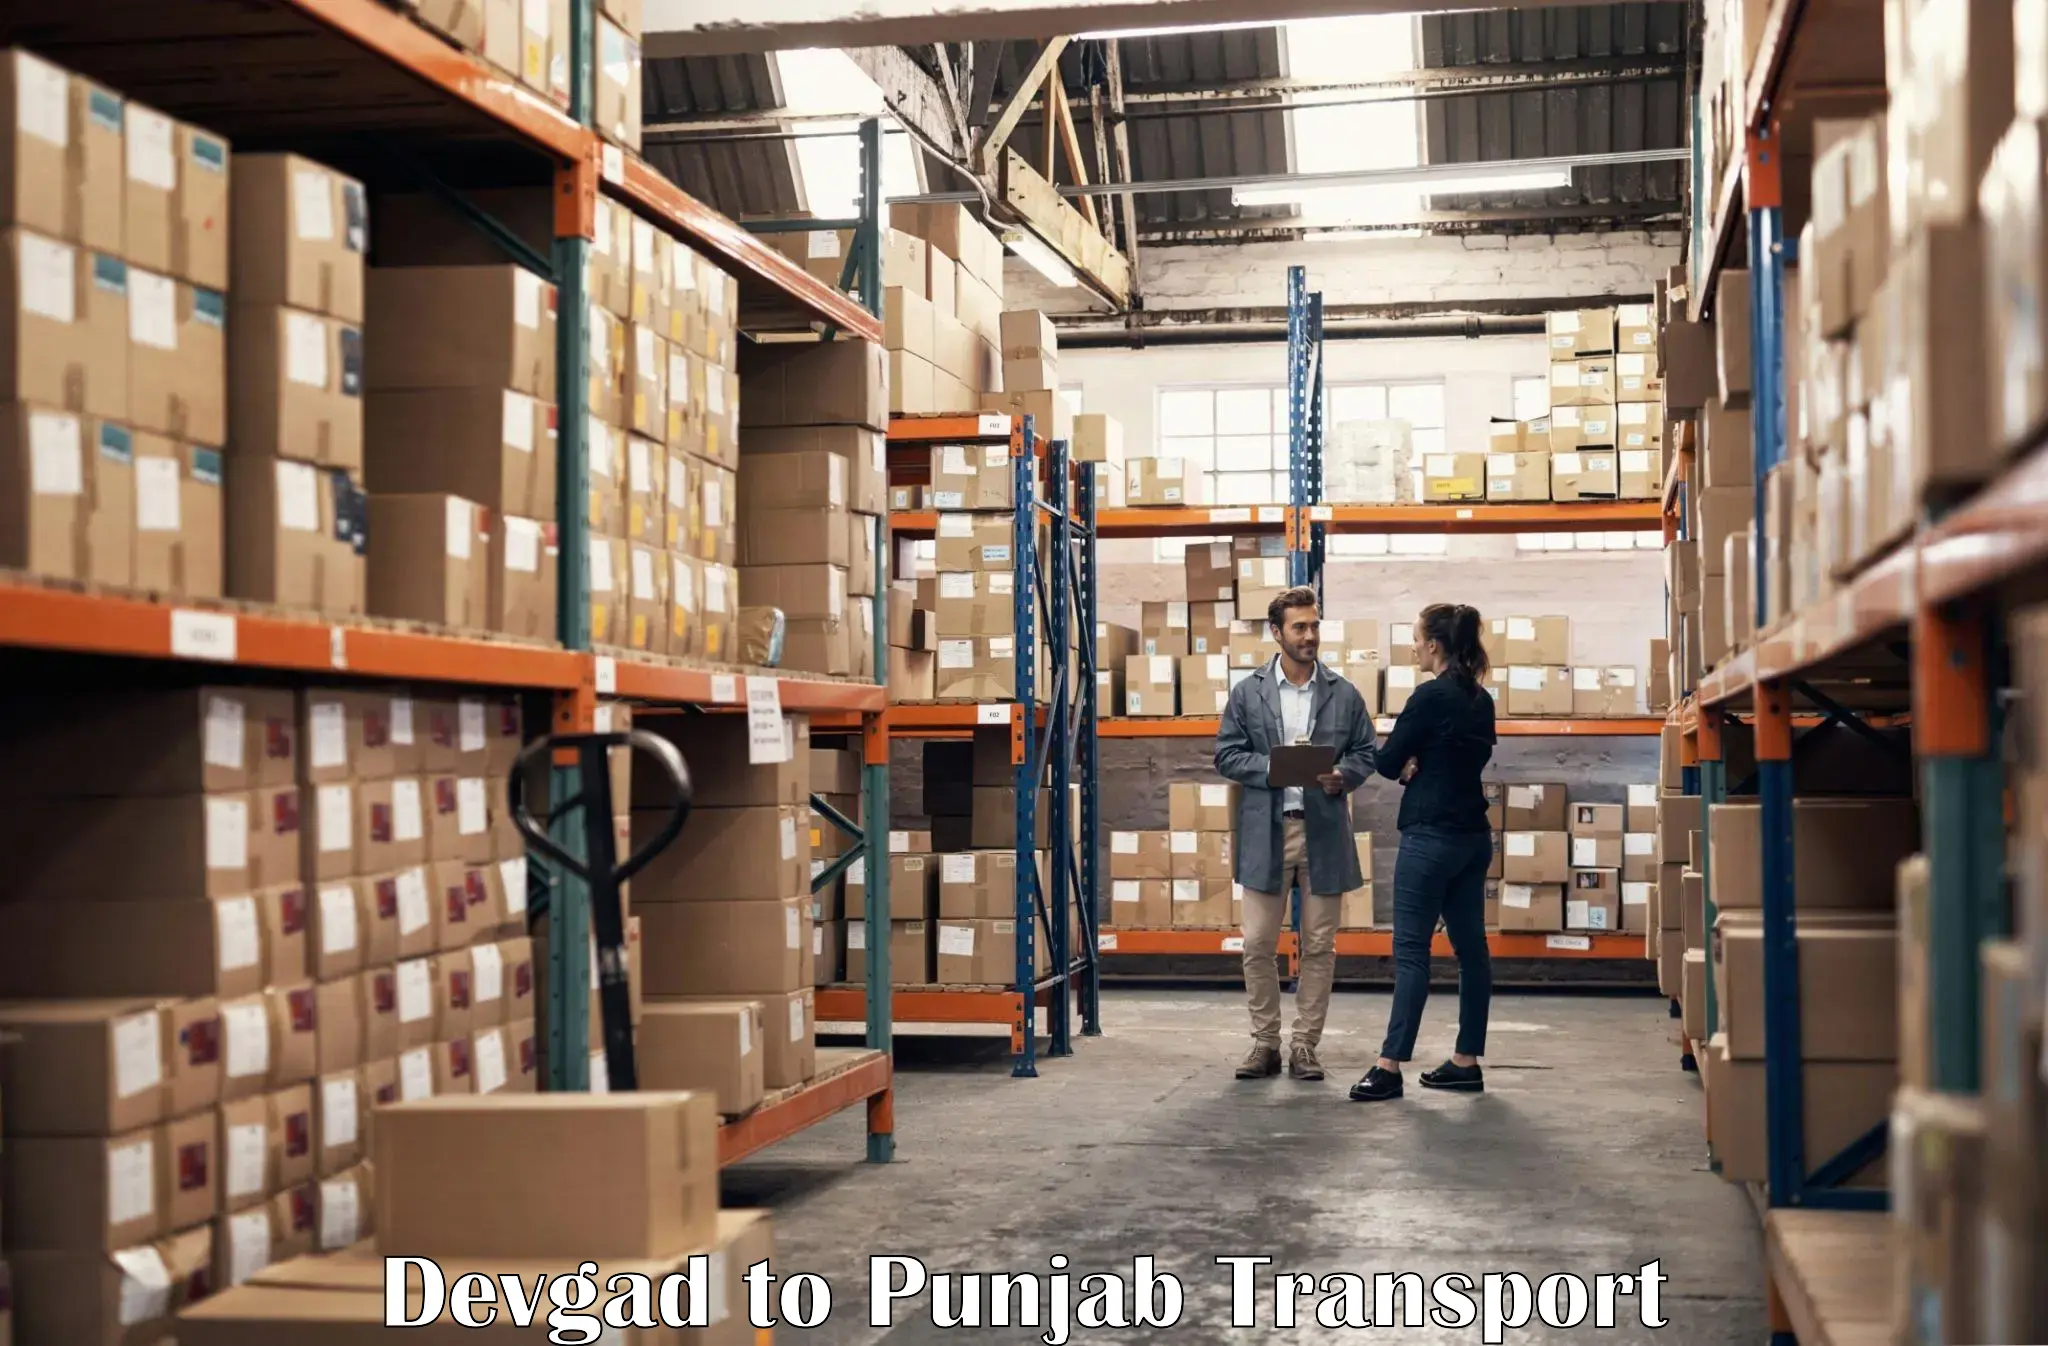 Commercial transport service Devgad to Pathankot